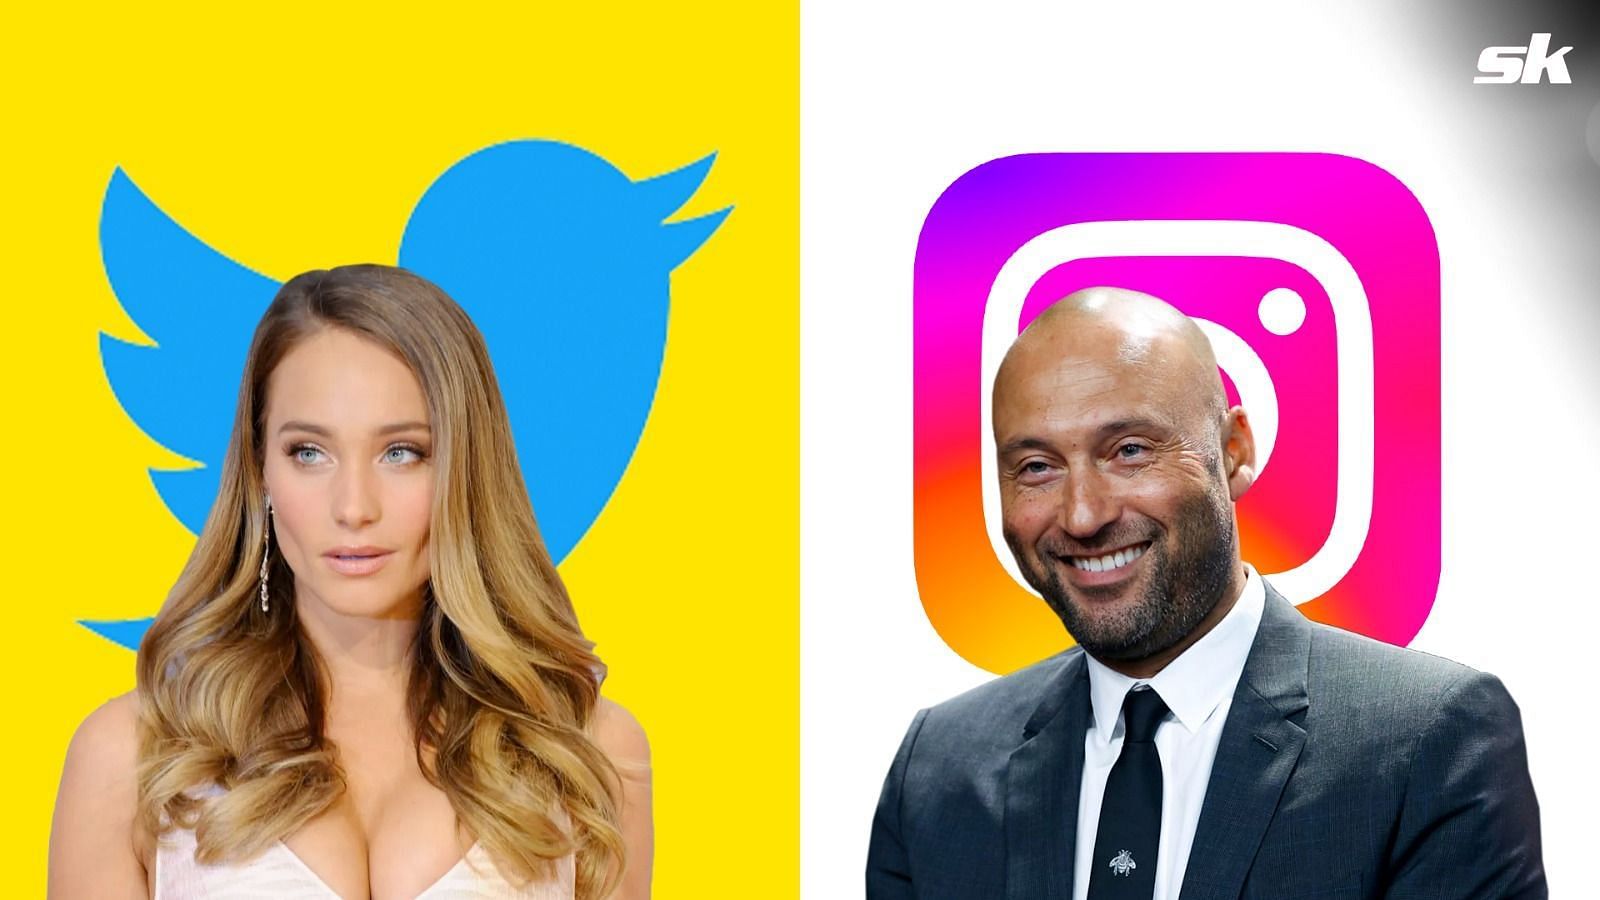 Derek Jeter and wife Hannah are not jazzed about social media use